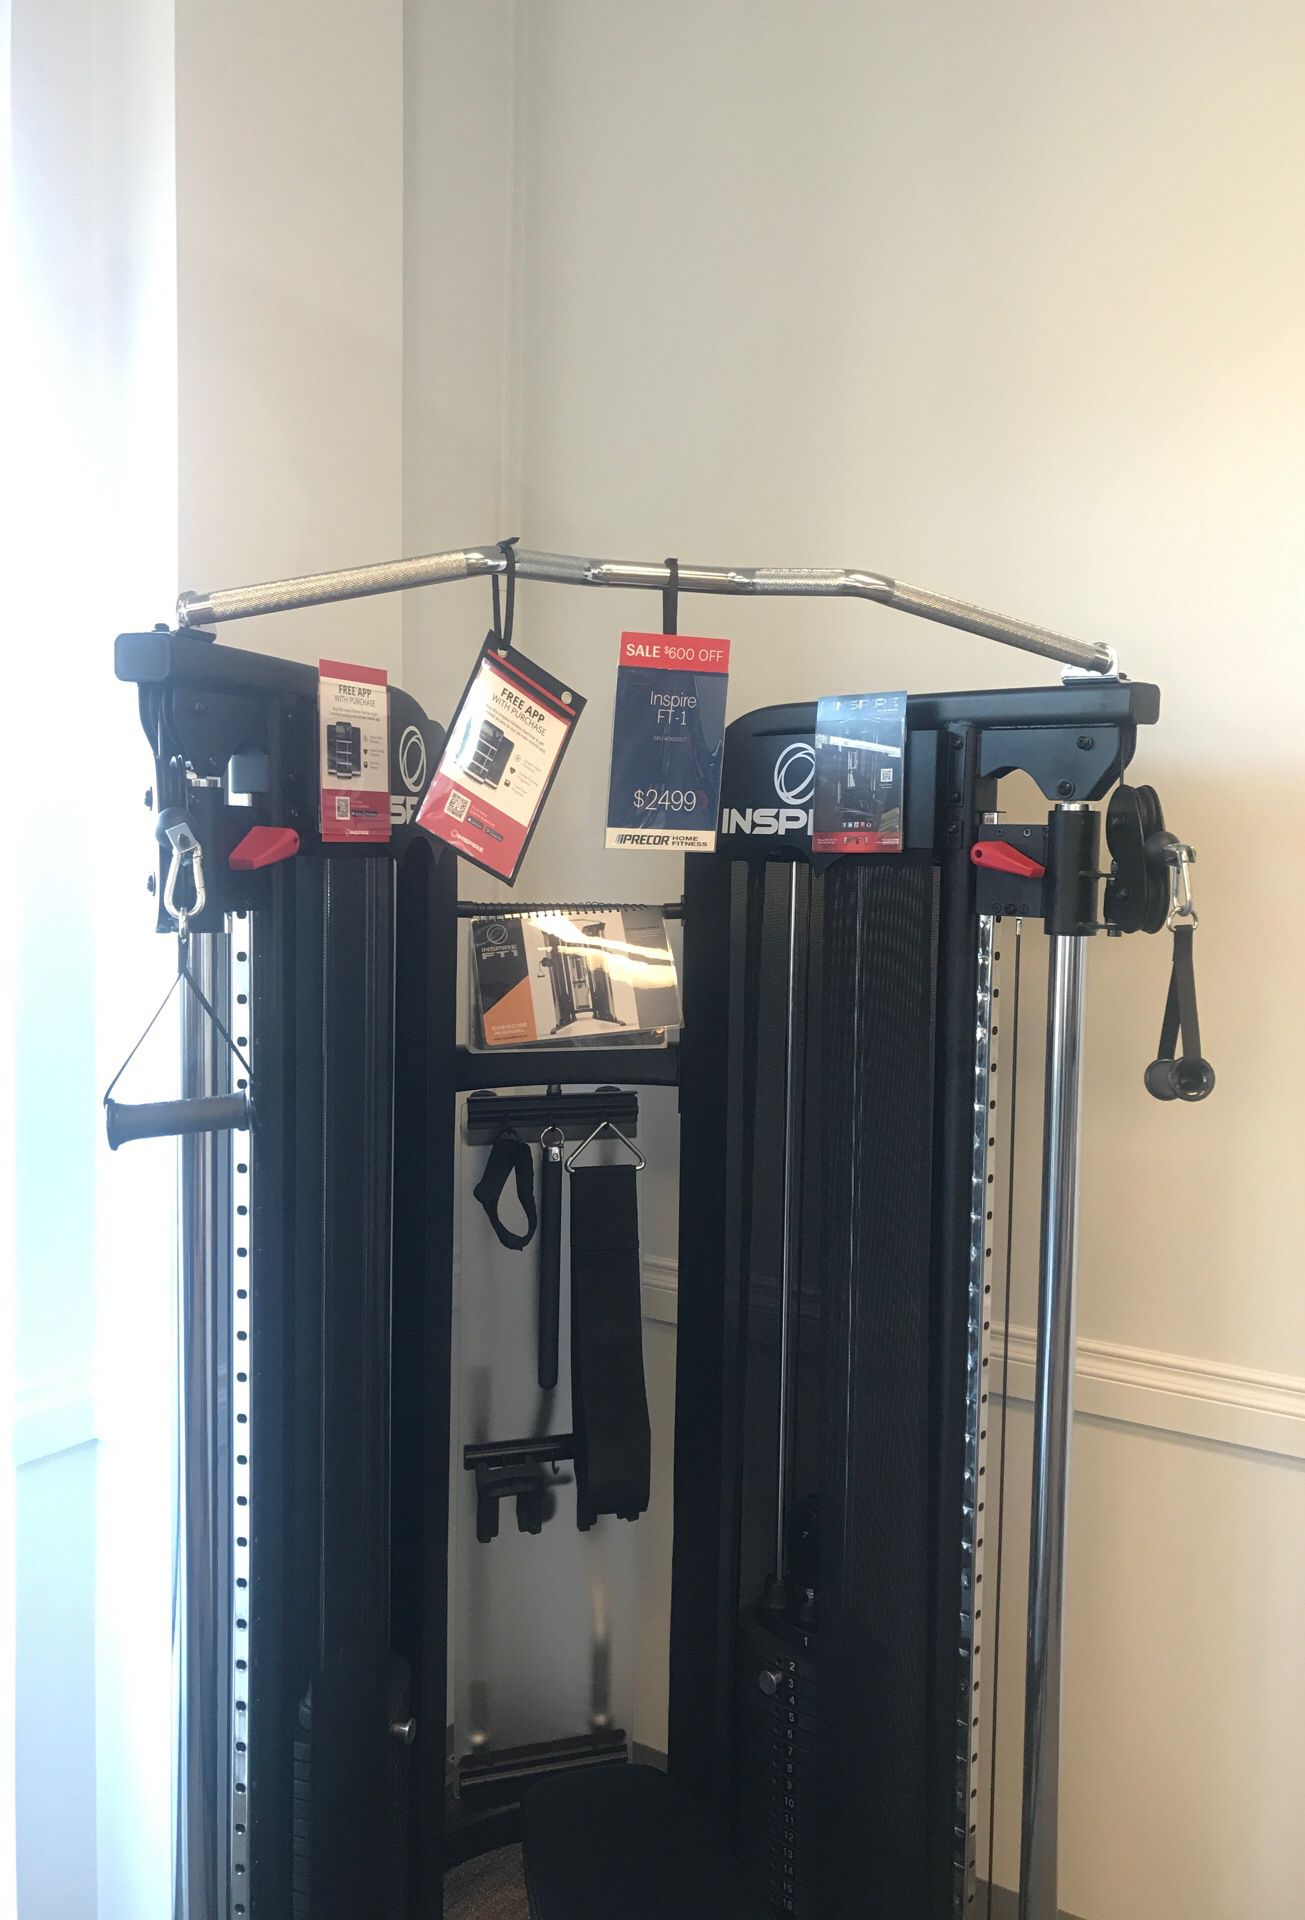 Inspire FT-1 cable gym